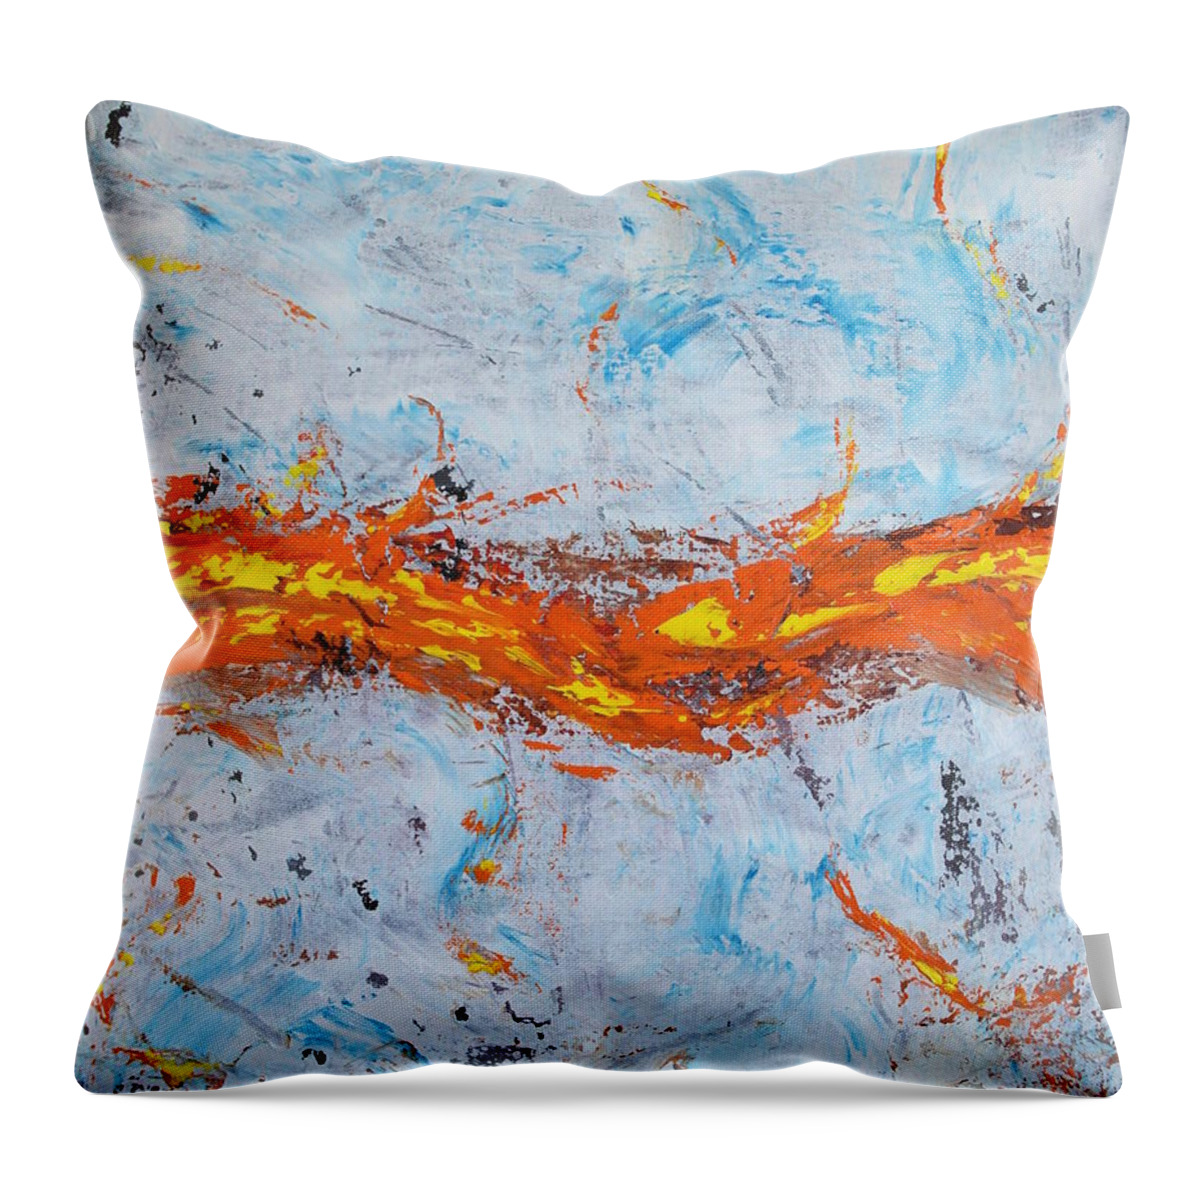 Abstract Throw Pillow featuring the painting Sunkist by Wayne Cantrell